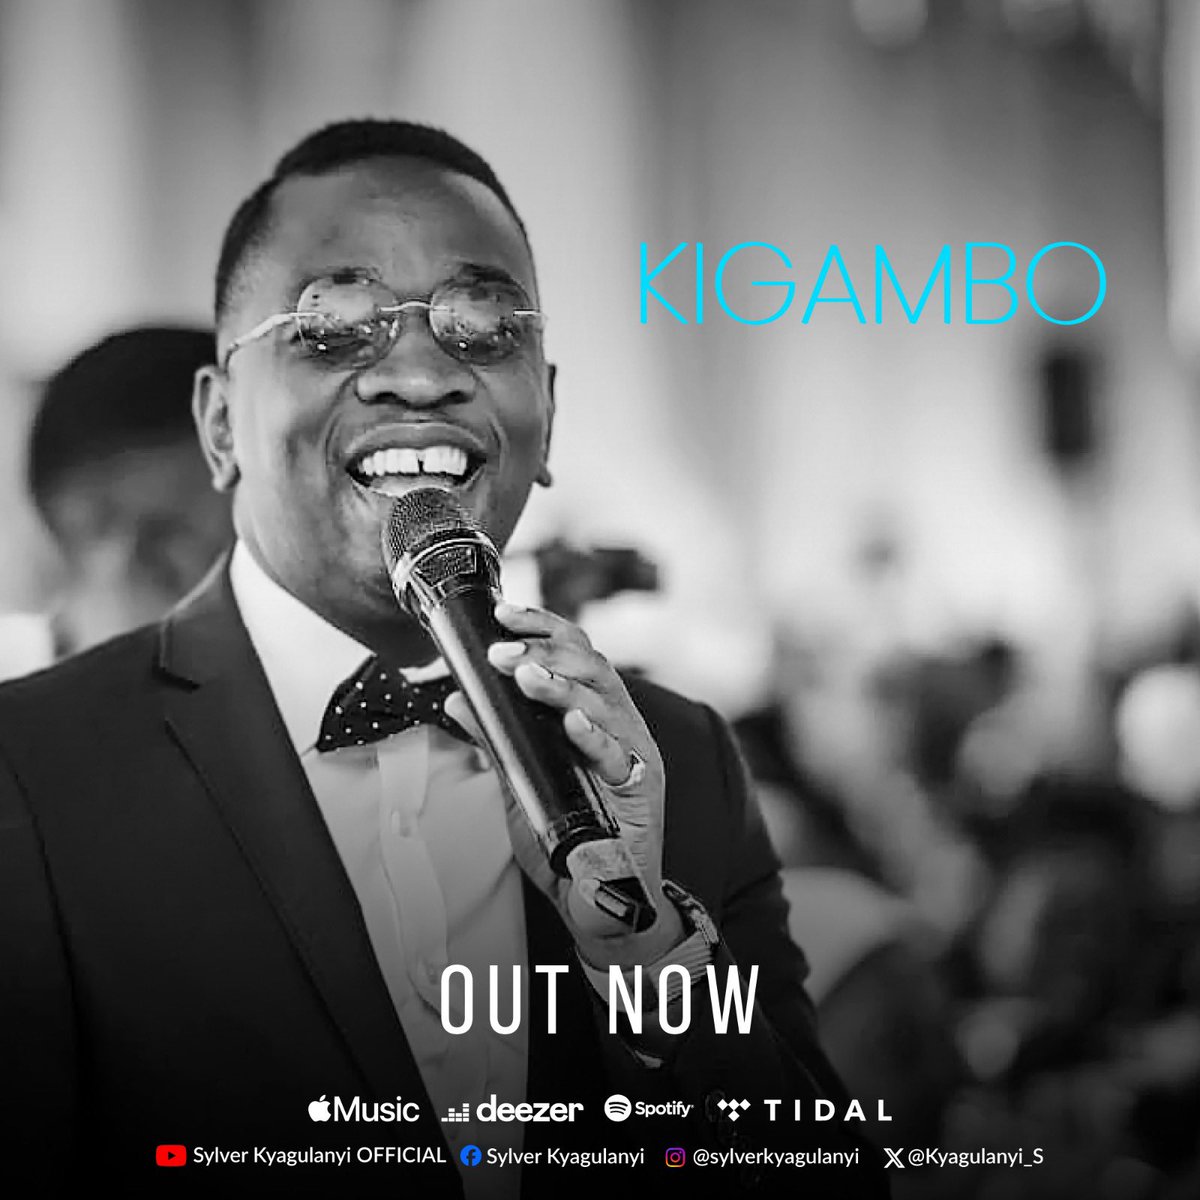 I’m always excited to release a new musical creation. Here’s yet another one - ‘Kigambo’. Inspired by faith in the enduring power of God’s word. Follow the link to check out #Kigambo youtu.be/mXajH-ymCB0?si…